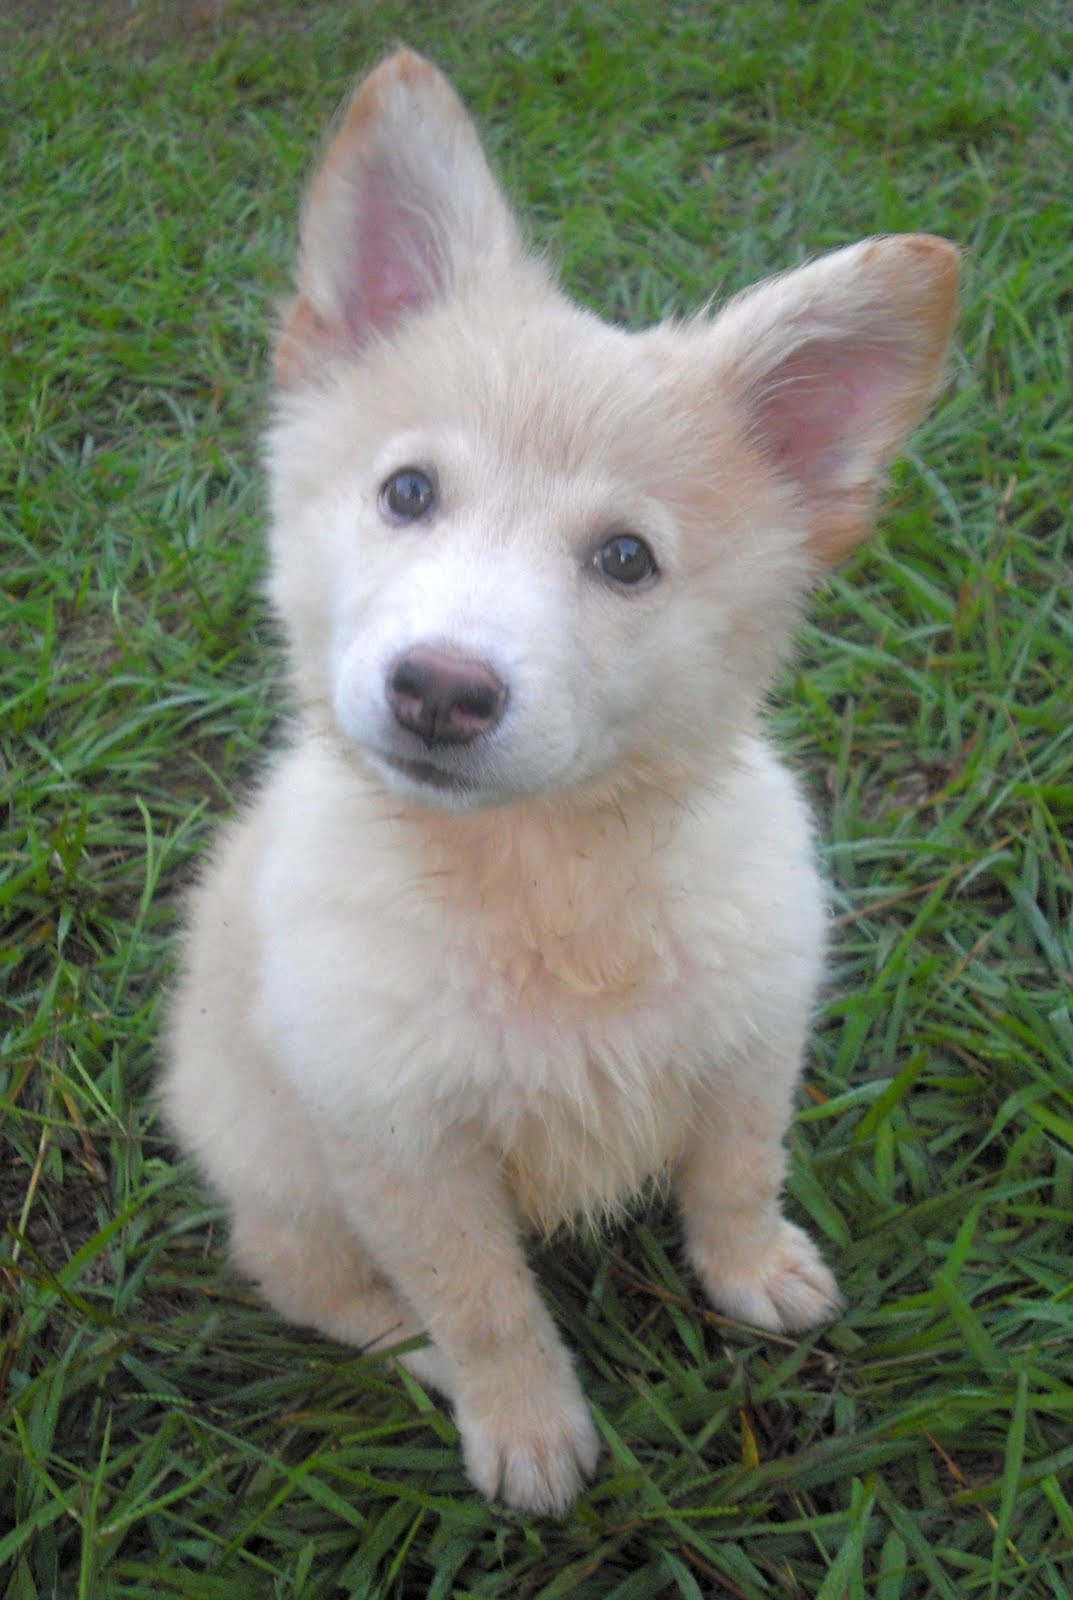 Chloe the White Fluffy Shepherd Puppy ~ Adopted!